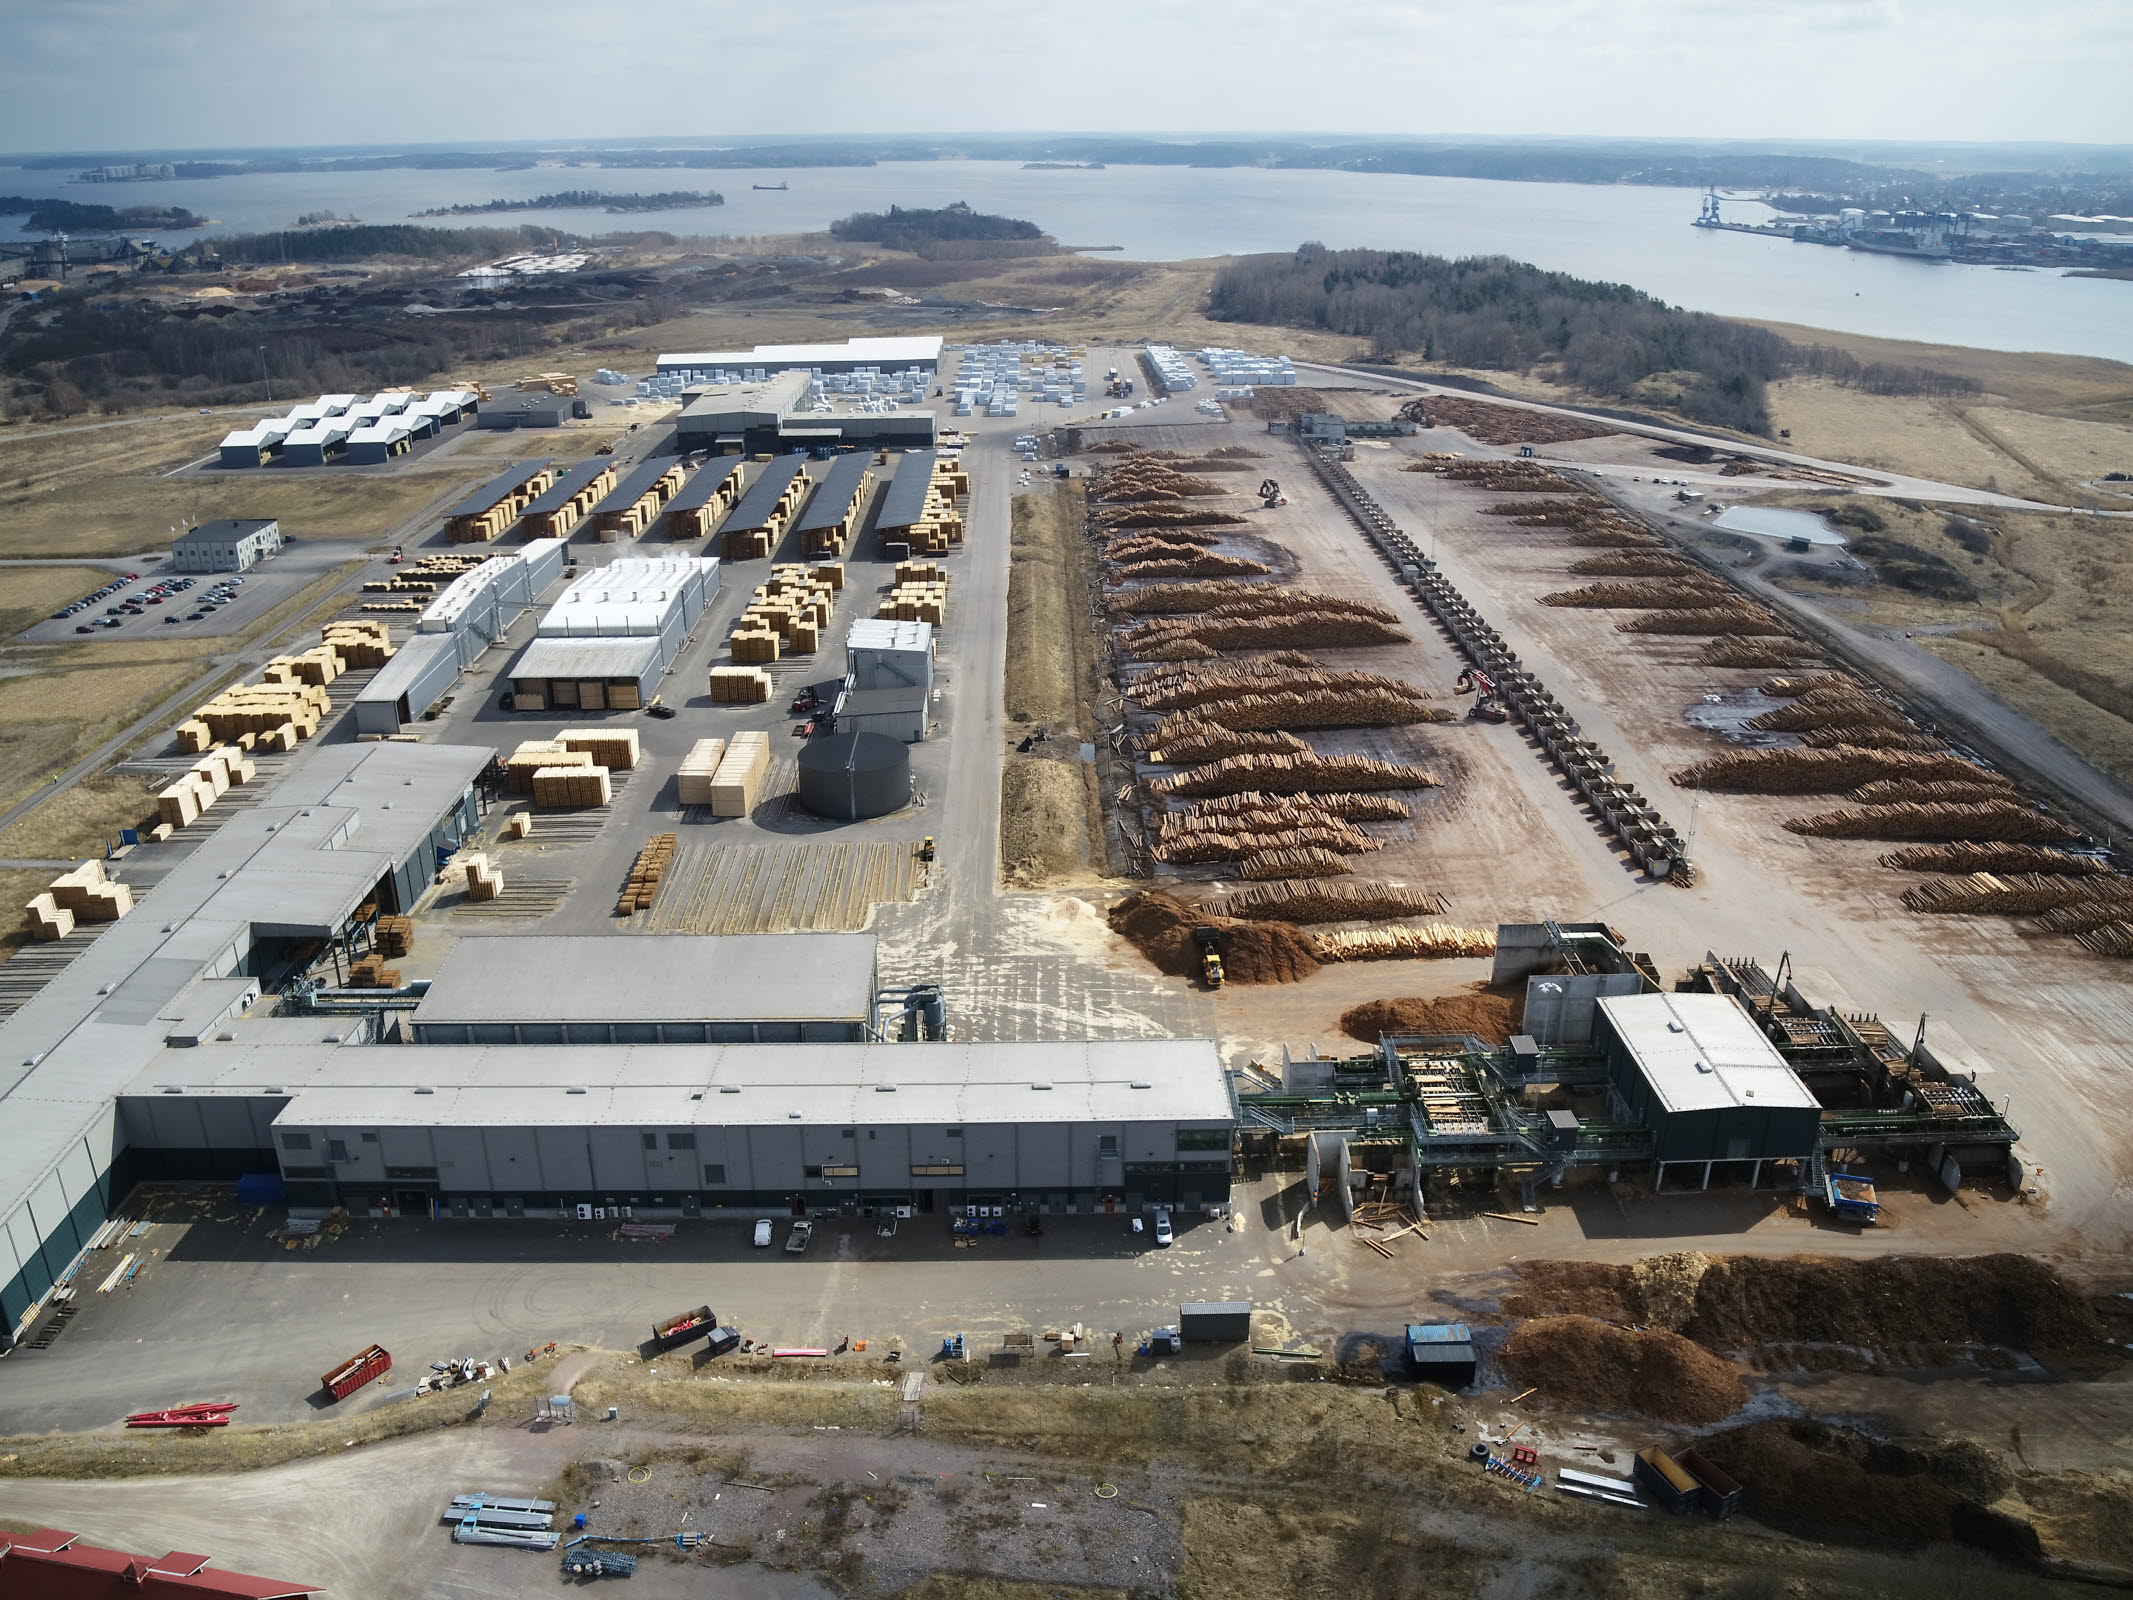 Aerial view of a timber yard, buildings, and stacks of lumber